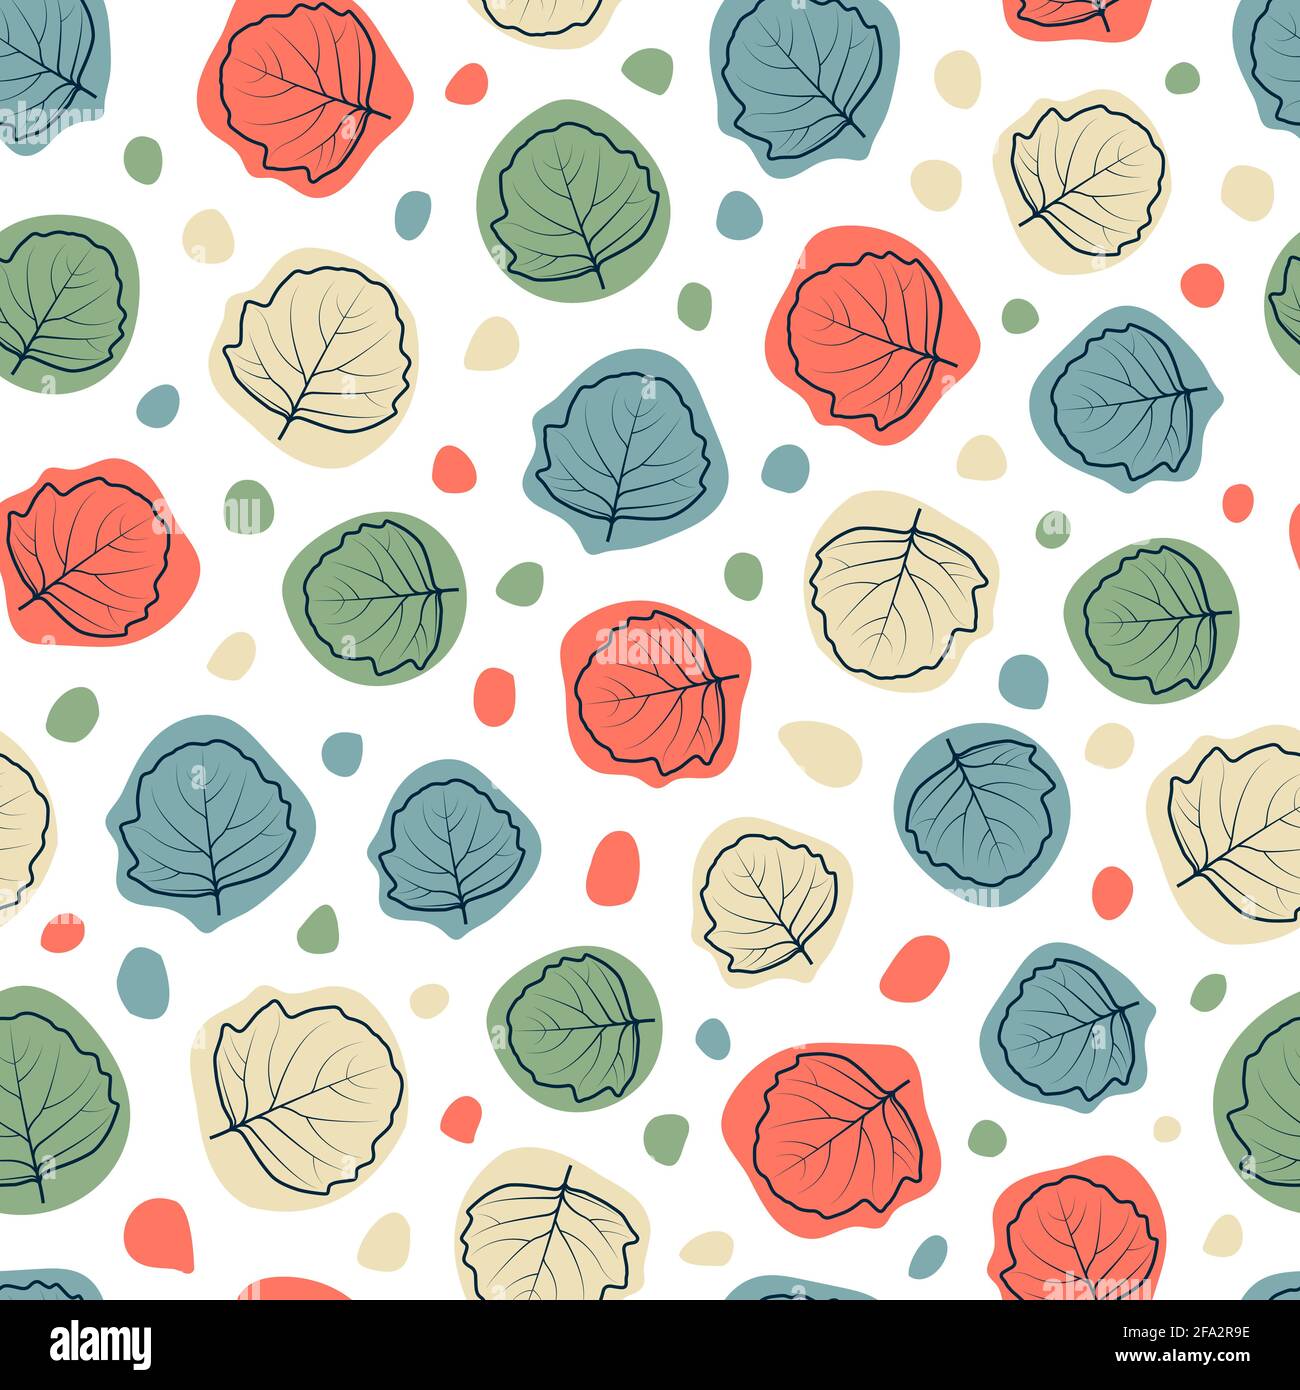 Fashionable ditsy vector floral seamless pattern design of exotic leaves outlines. Artistic repeating texture foliage background design for textile Stock Vector